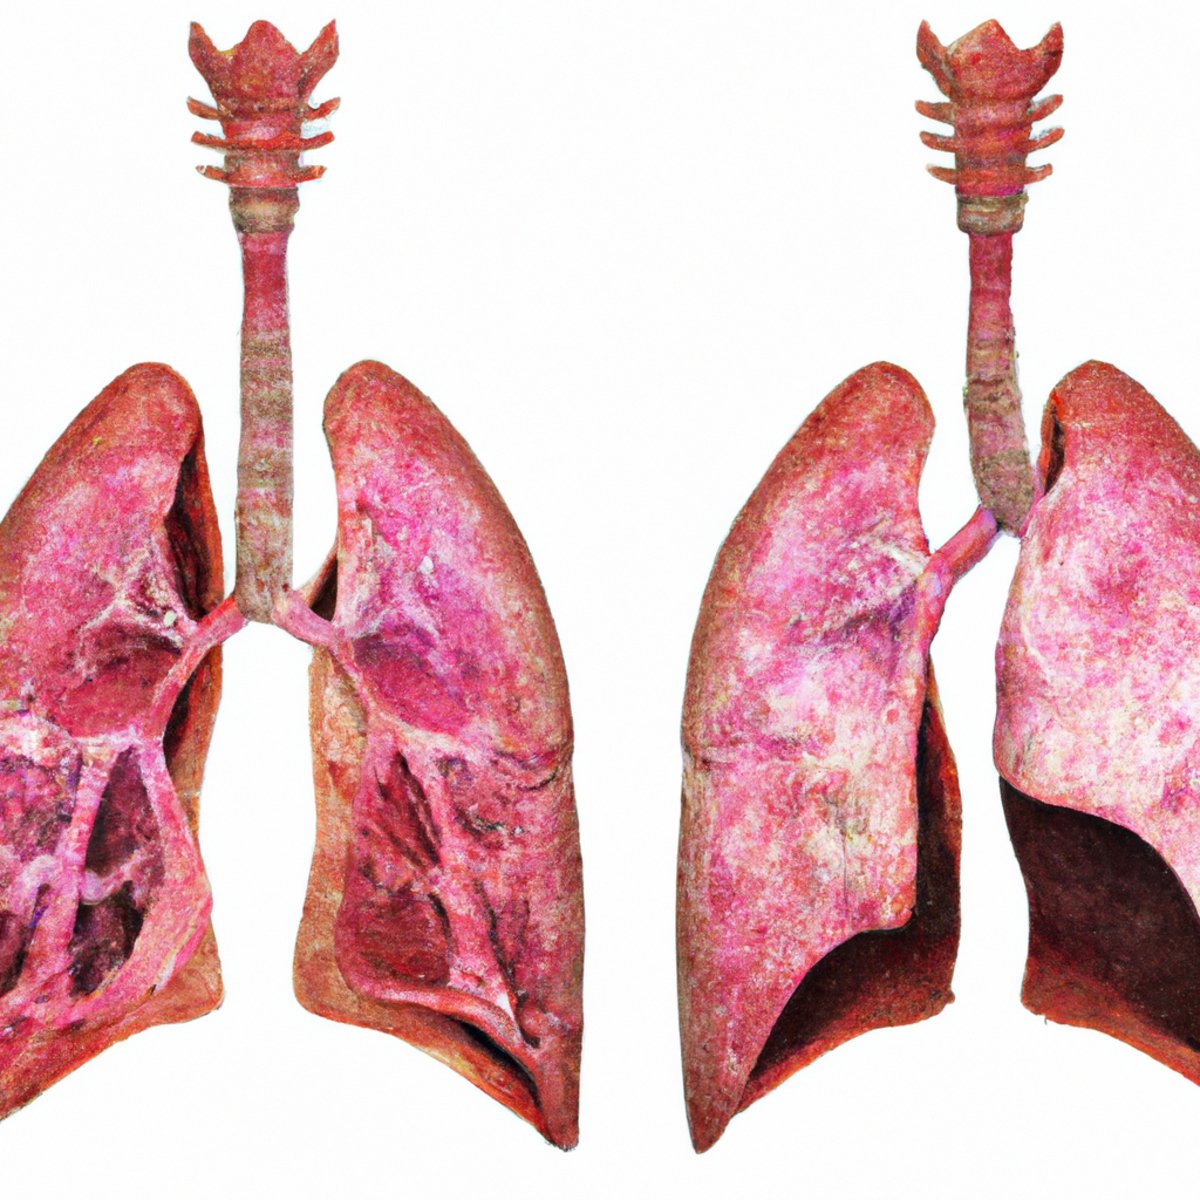 Close-up comparison of a healthy pink lung and a damaged grey lung - Alpha-1 Antitrypsin Deficiency